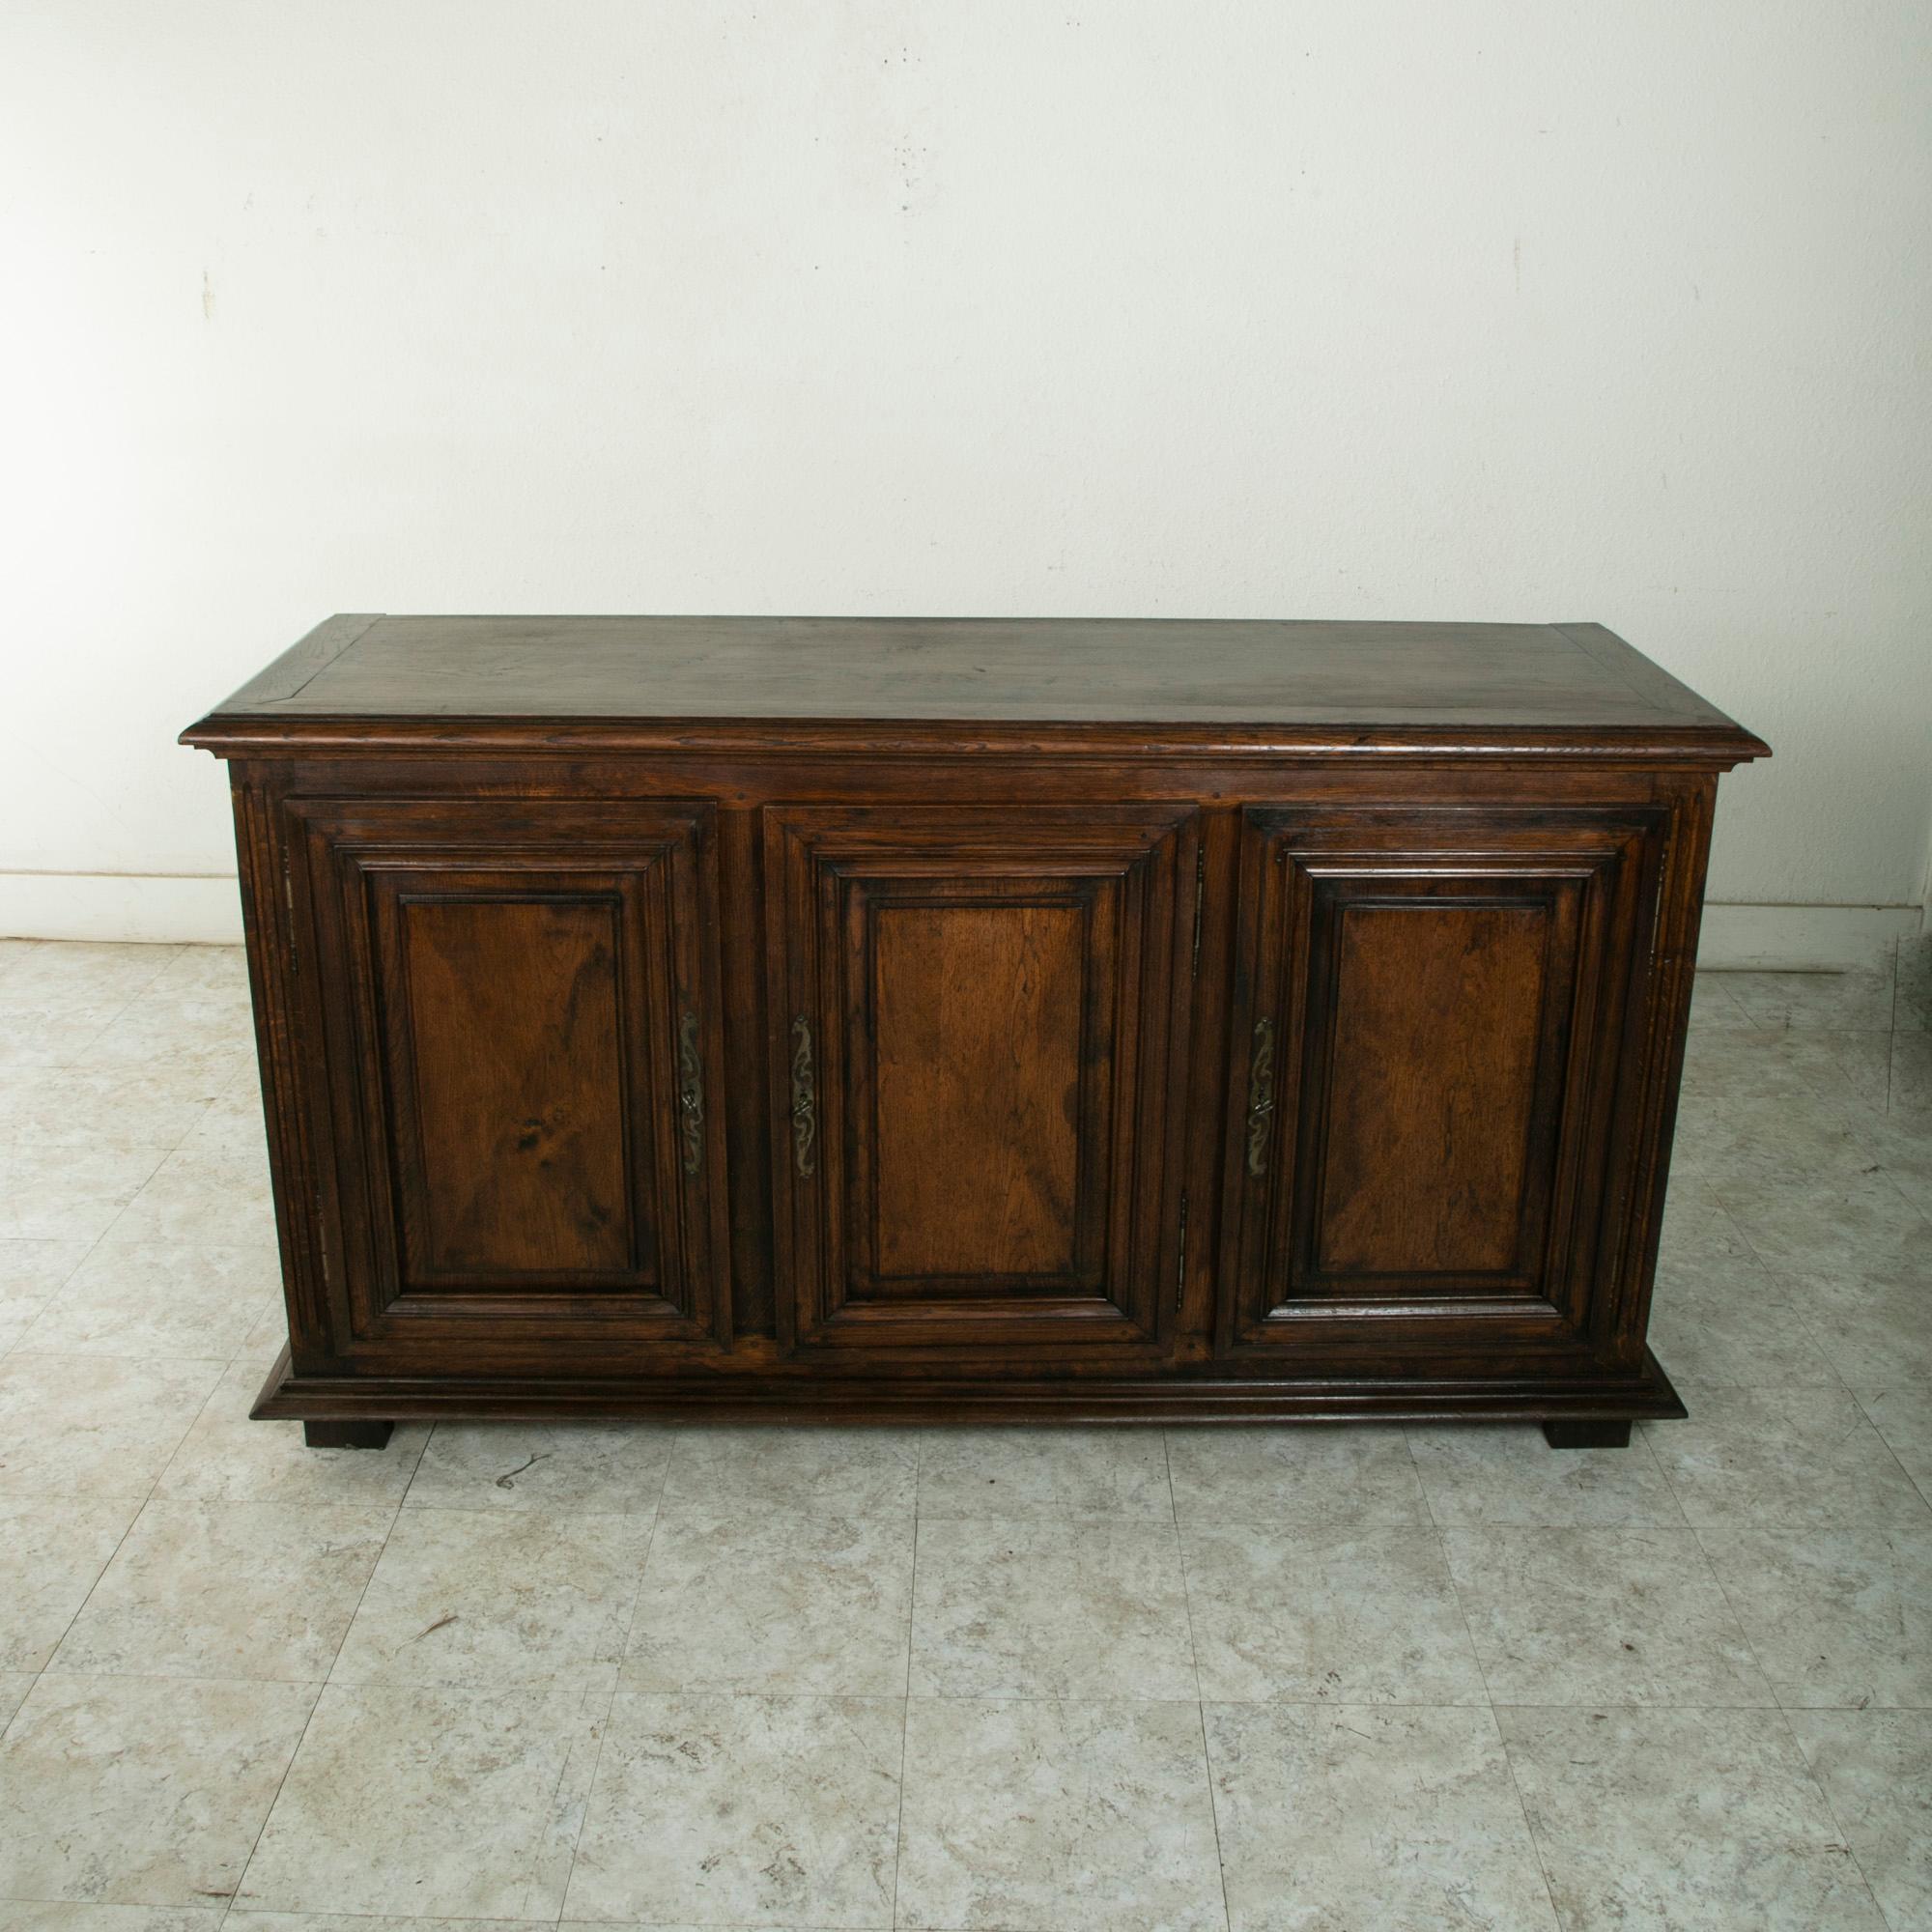 This French Louis XIV style oak enfilade or sideboard from the turn of the twentieth century features hand pegged paneled sides and doors, and a beveled top. Its three doors display Louis XIV design elements with symmetrical diamond point